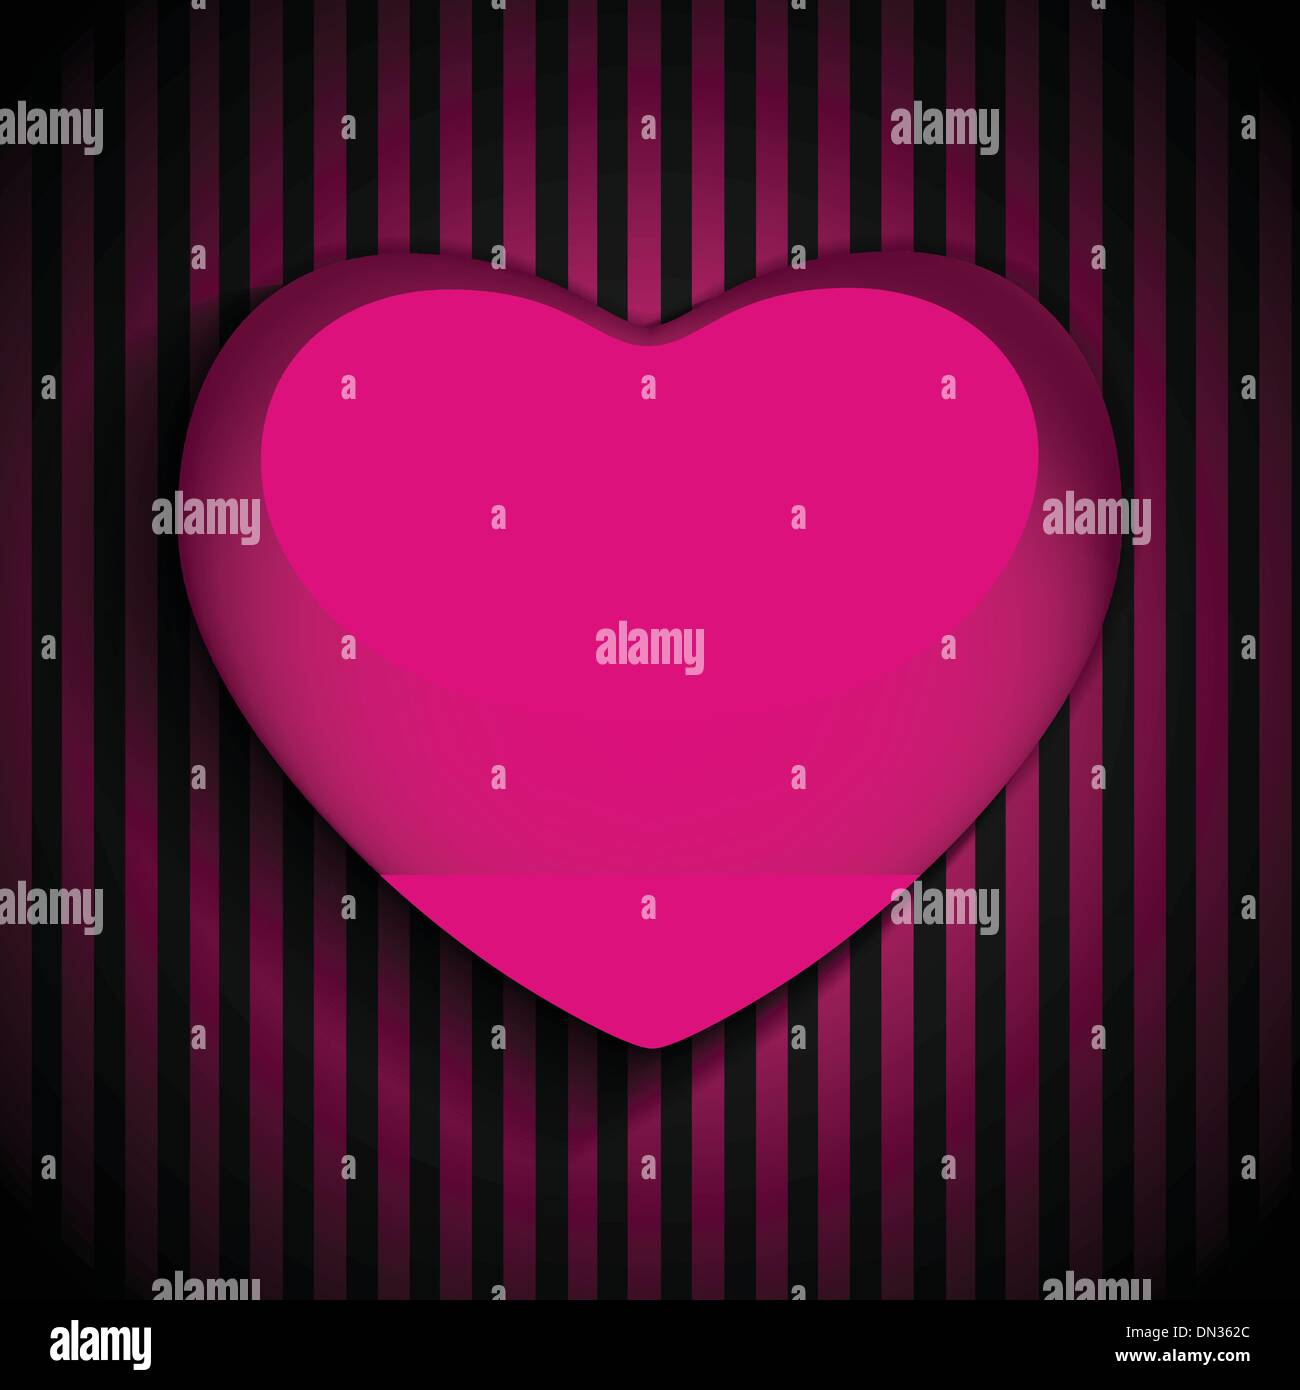 Glossy Emo Heart. Pink and Black Stripes Stock Vector